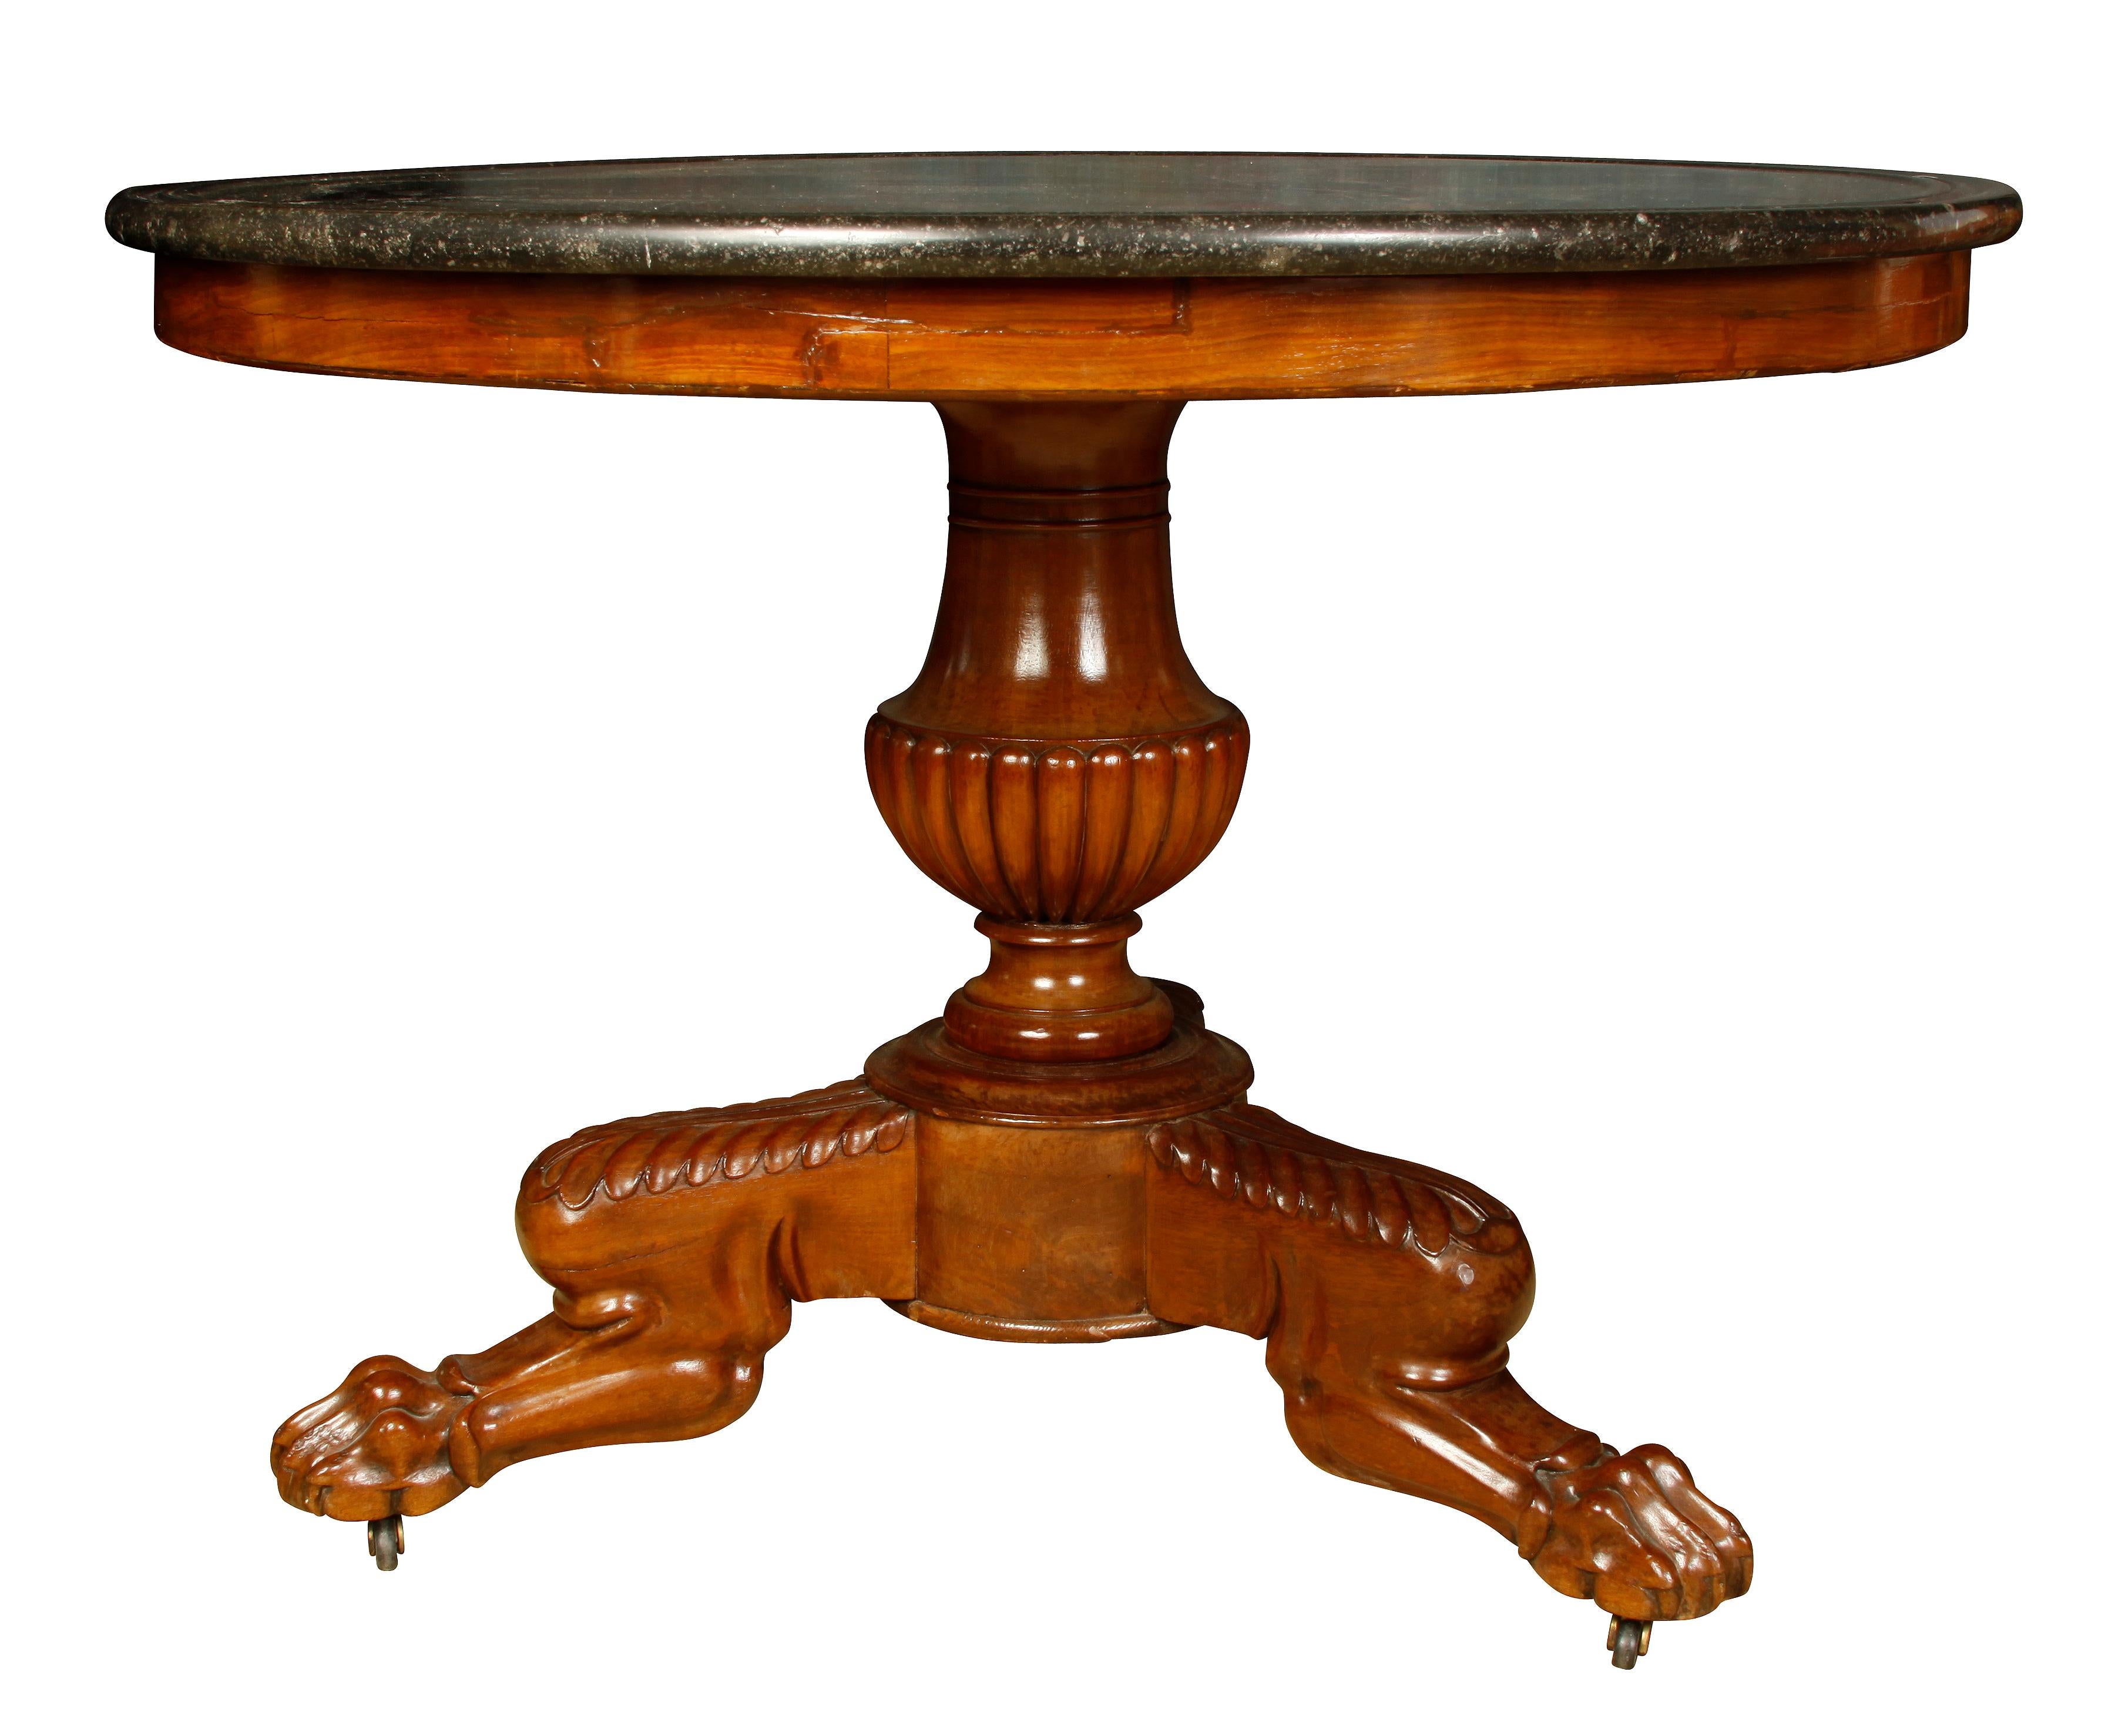 19th century English marble-topped wood pedestal table, claw foot base with a purbeck marble top.